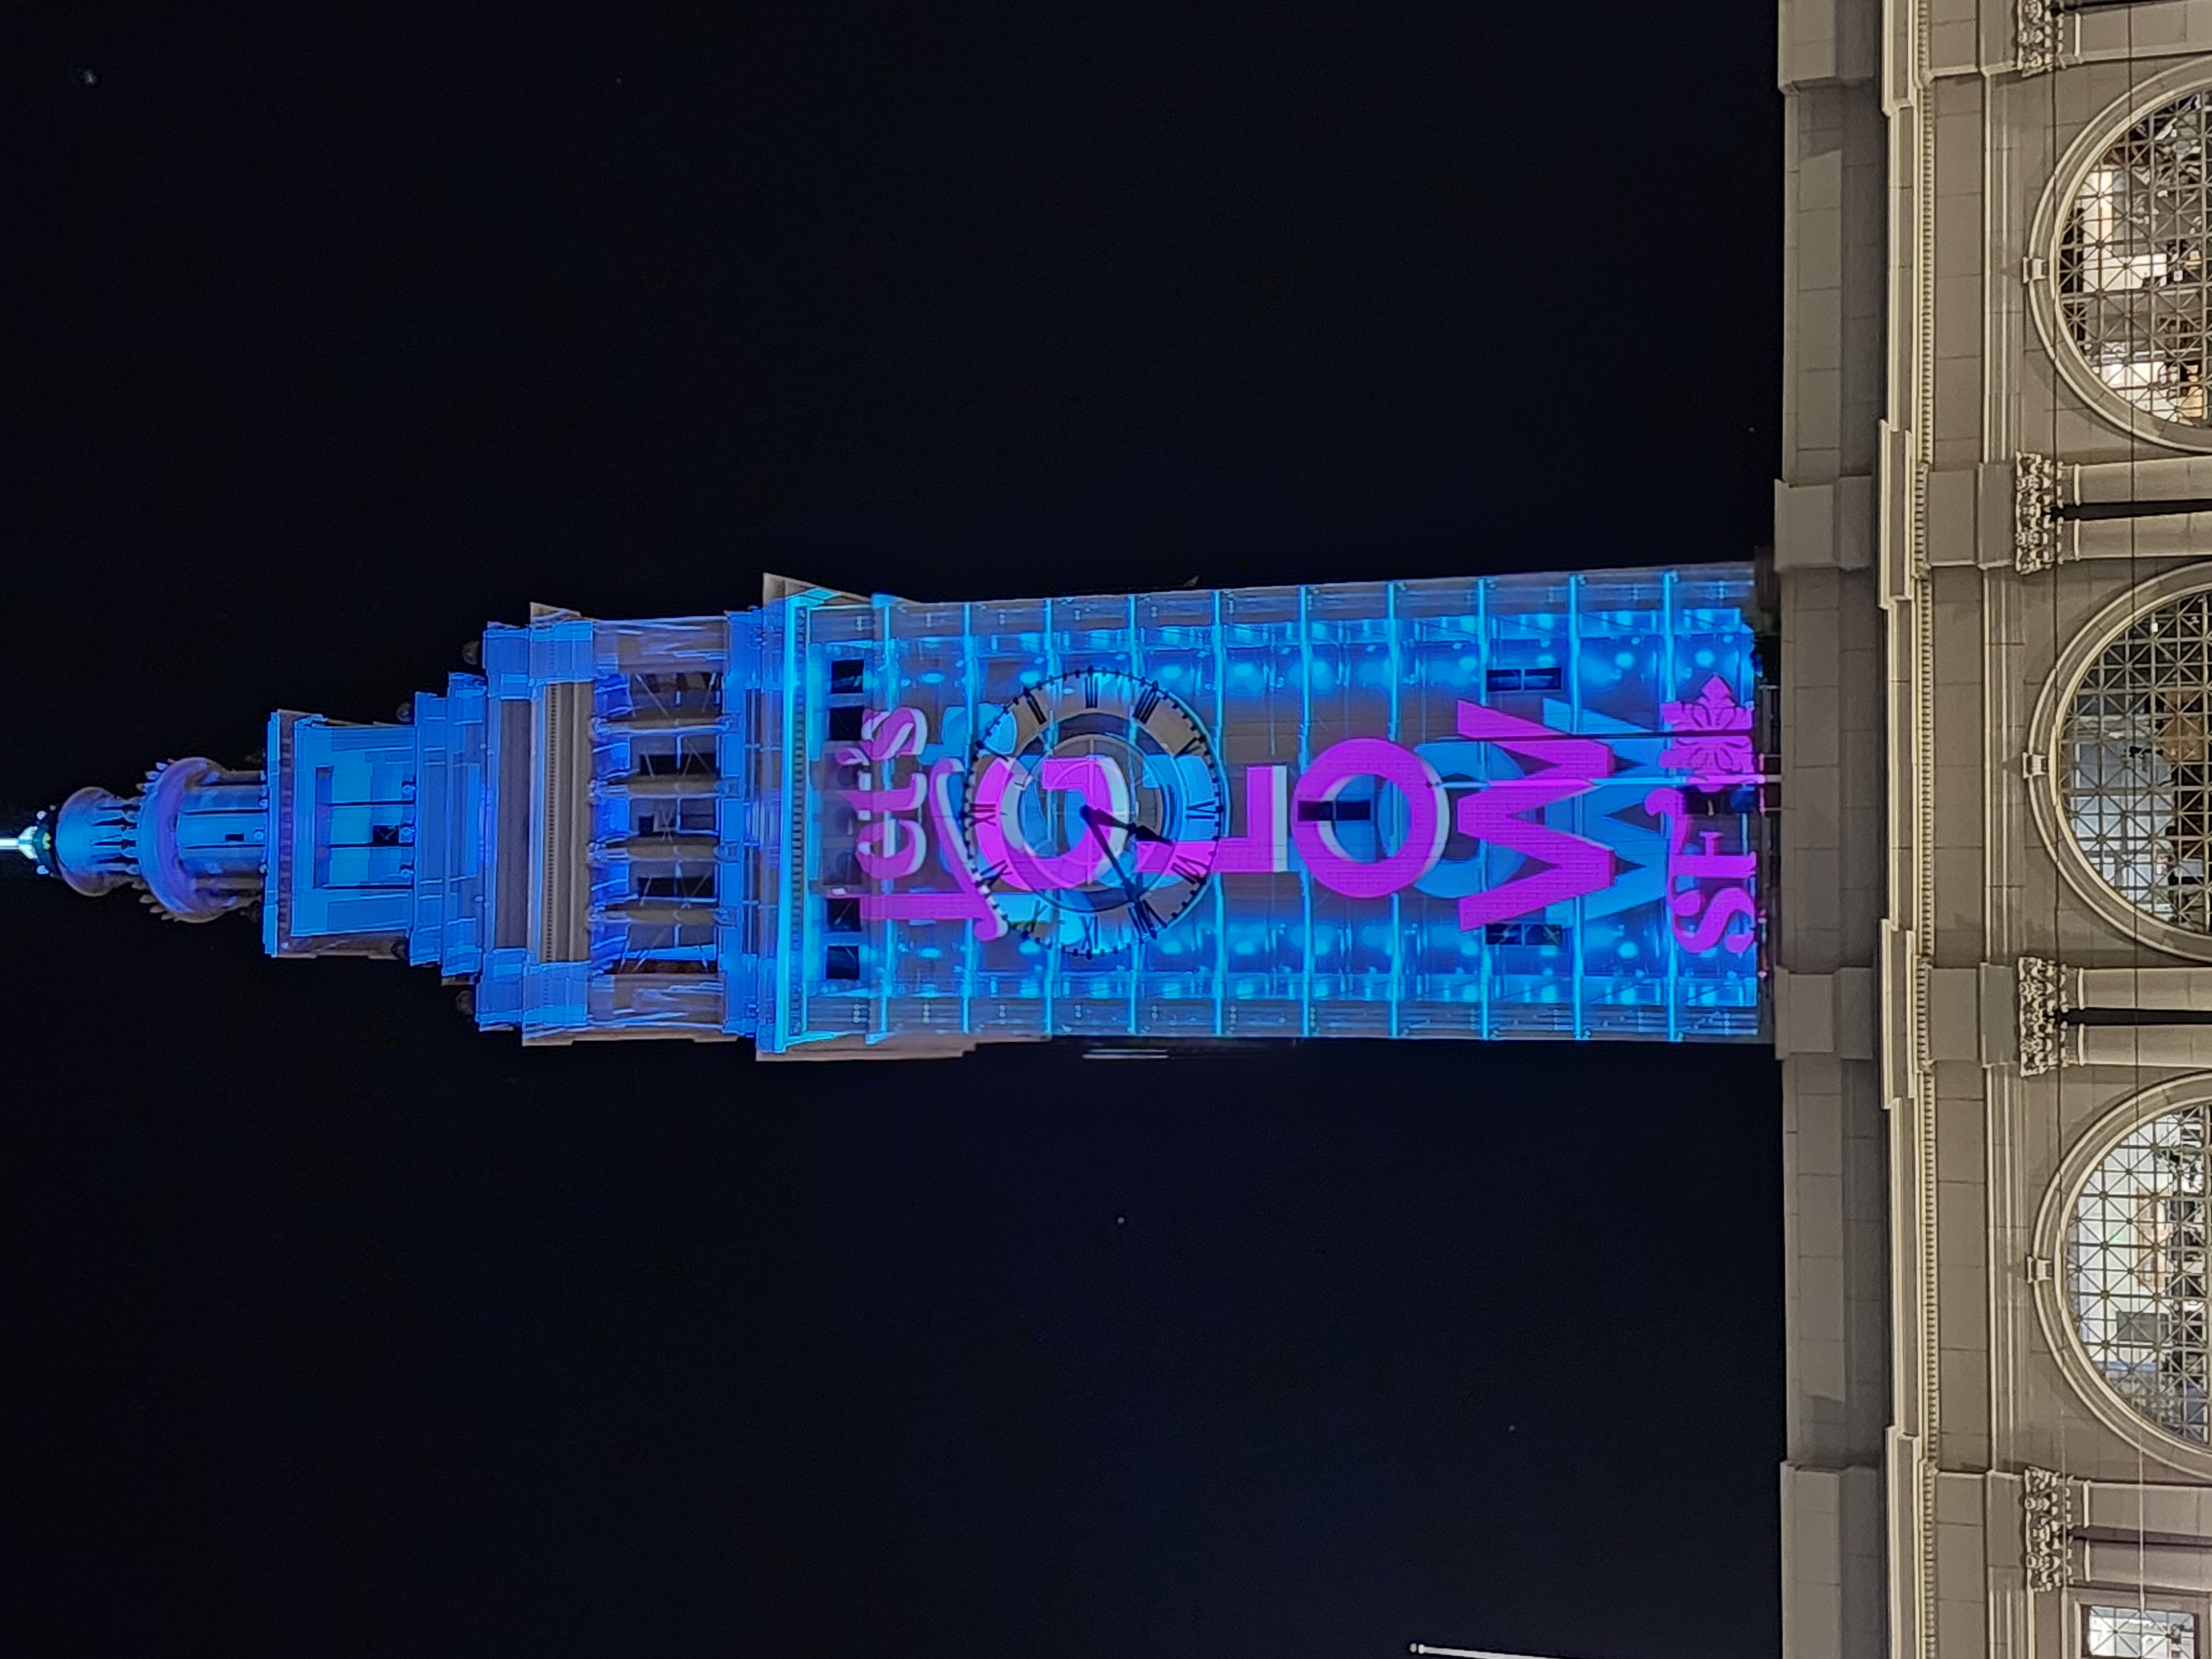 From December 1-10, projection tech from Panasonic Connect will illuminate six iconic San Francisco buildings, including the Ferry Building and Salesforce Tower, with art from 13 local and internationally renowned artists.